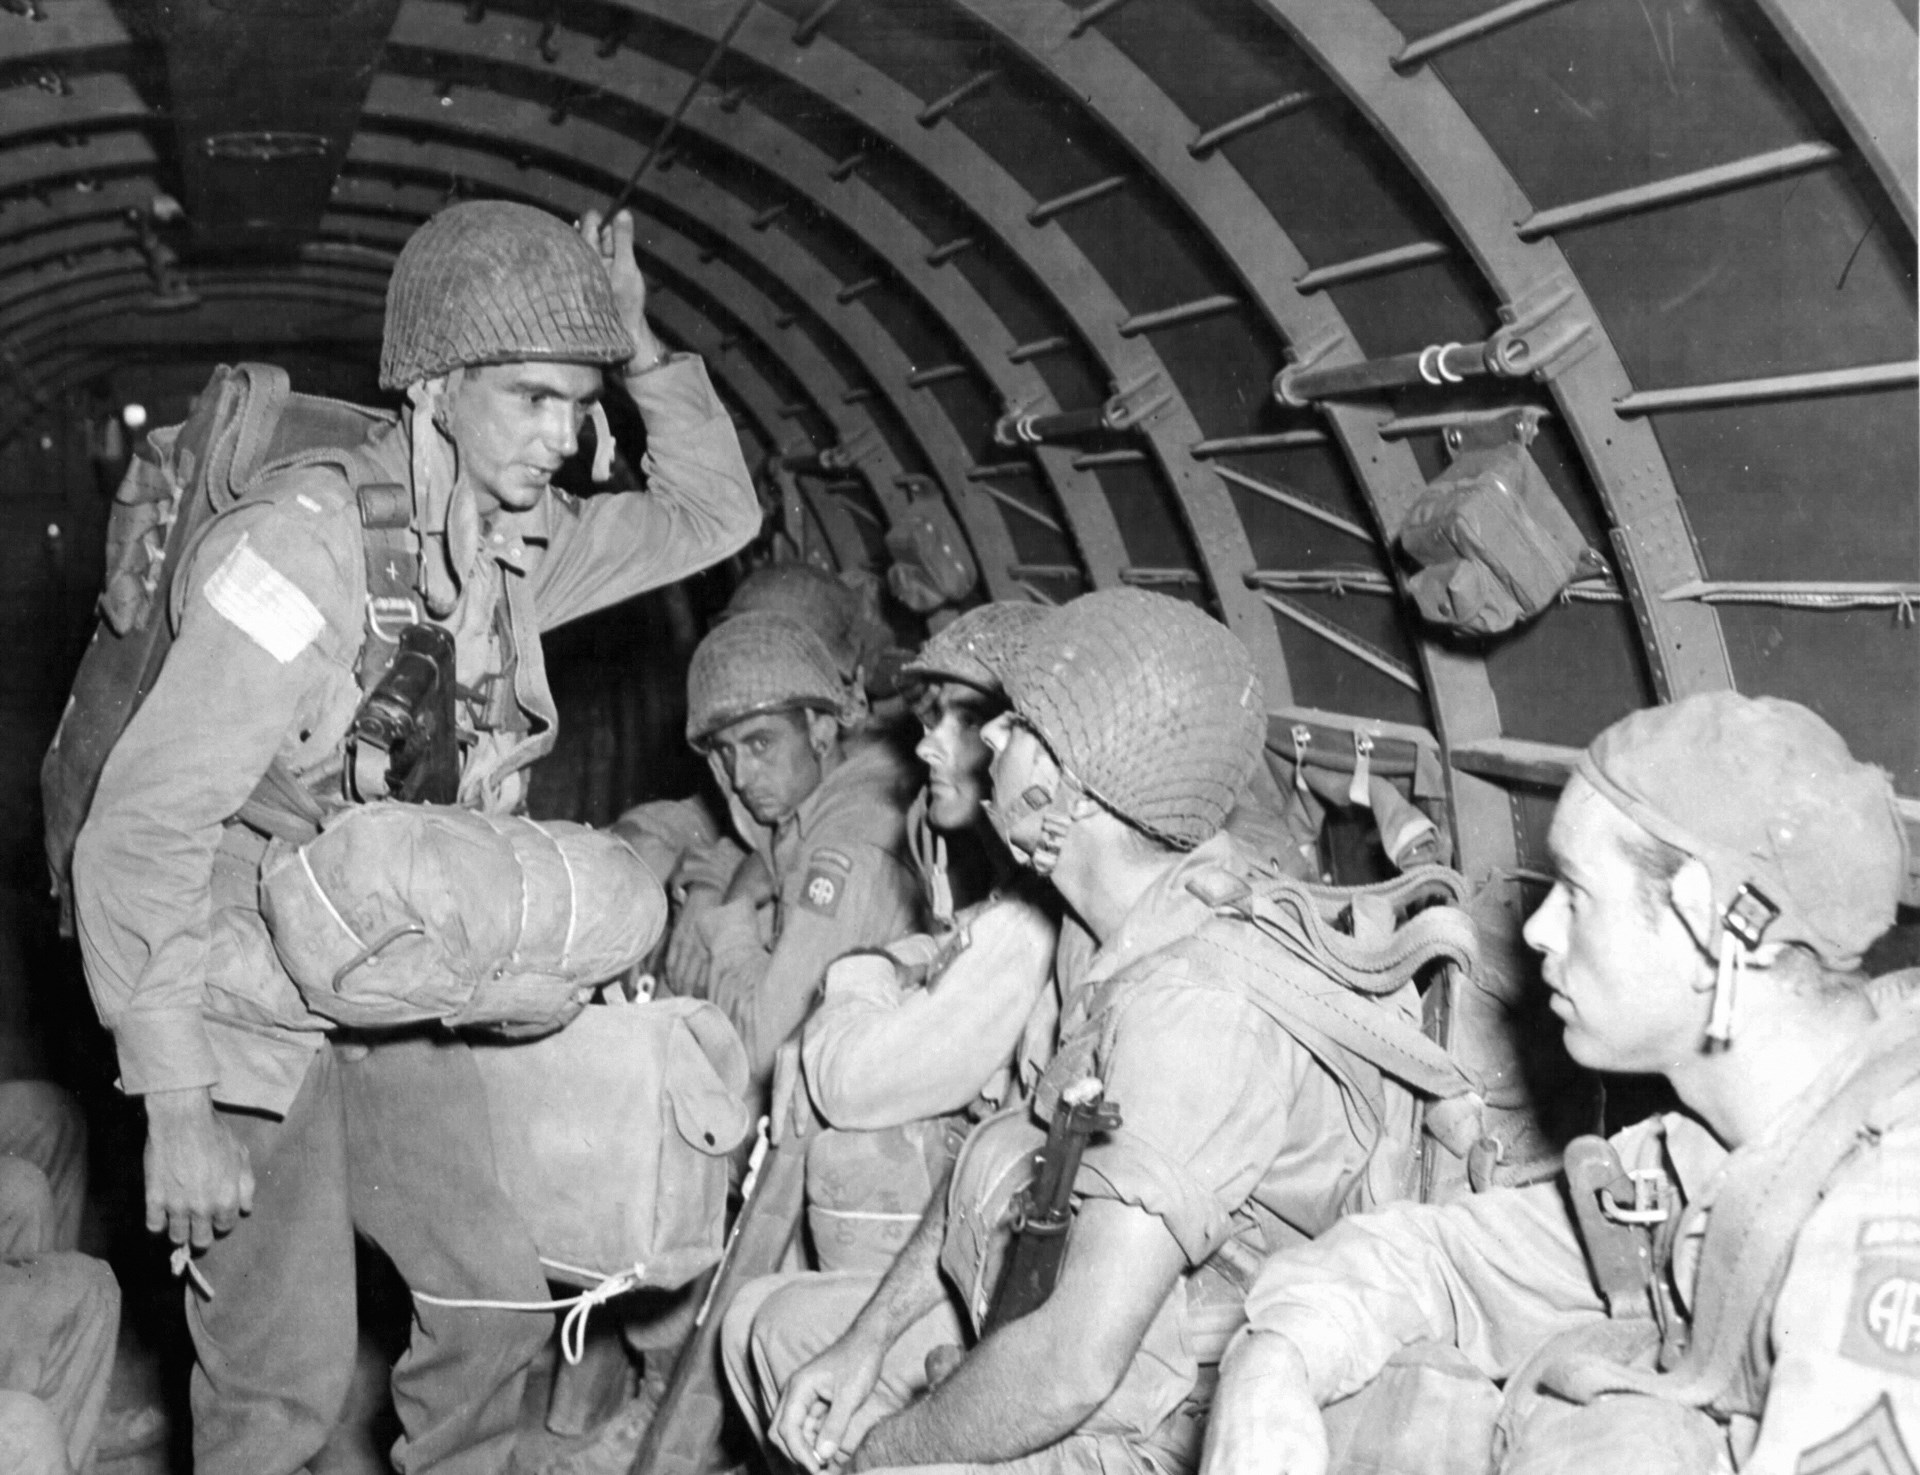 The first parachute assault of the 82nd Airborne Division came on July 9, 1943, over Sicily. The standing paratrooper carries an early M1A1 Carbine with a folding stock. NARA